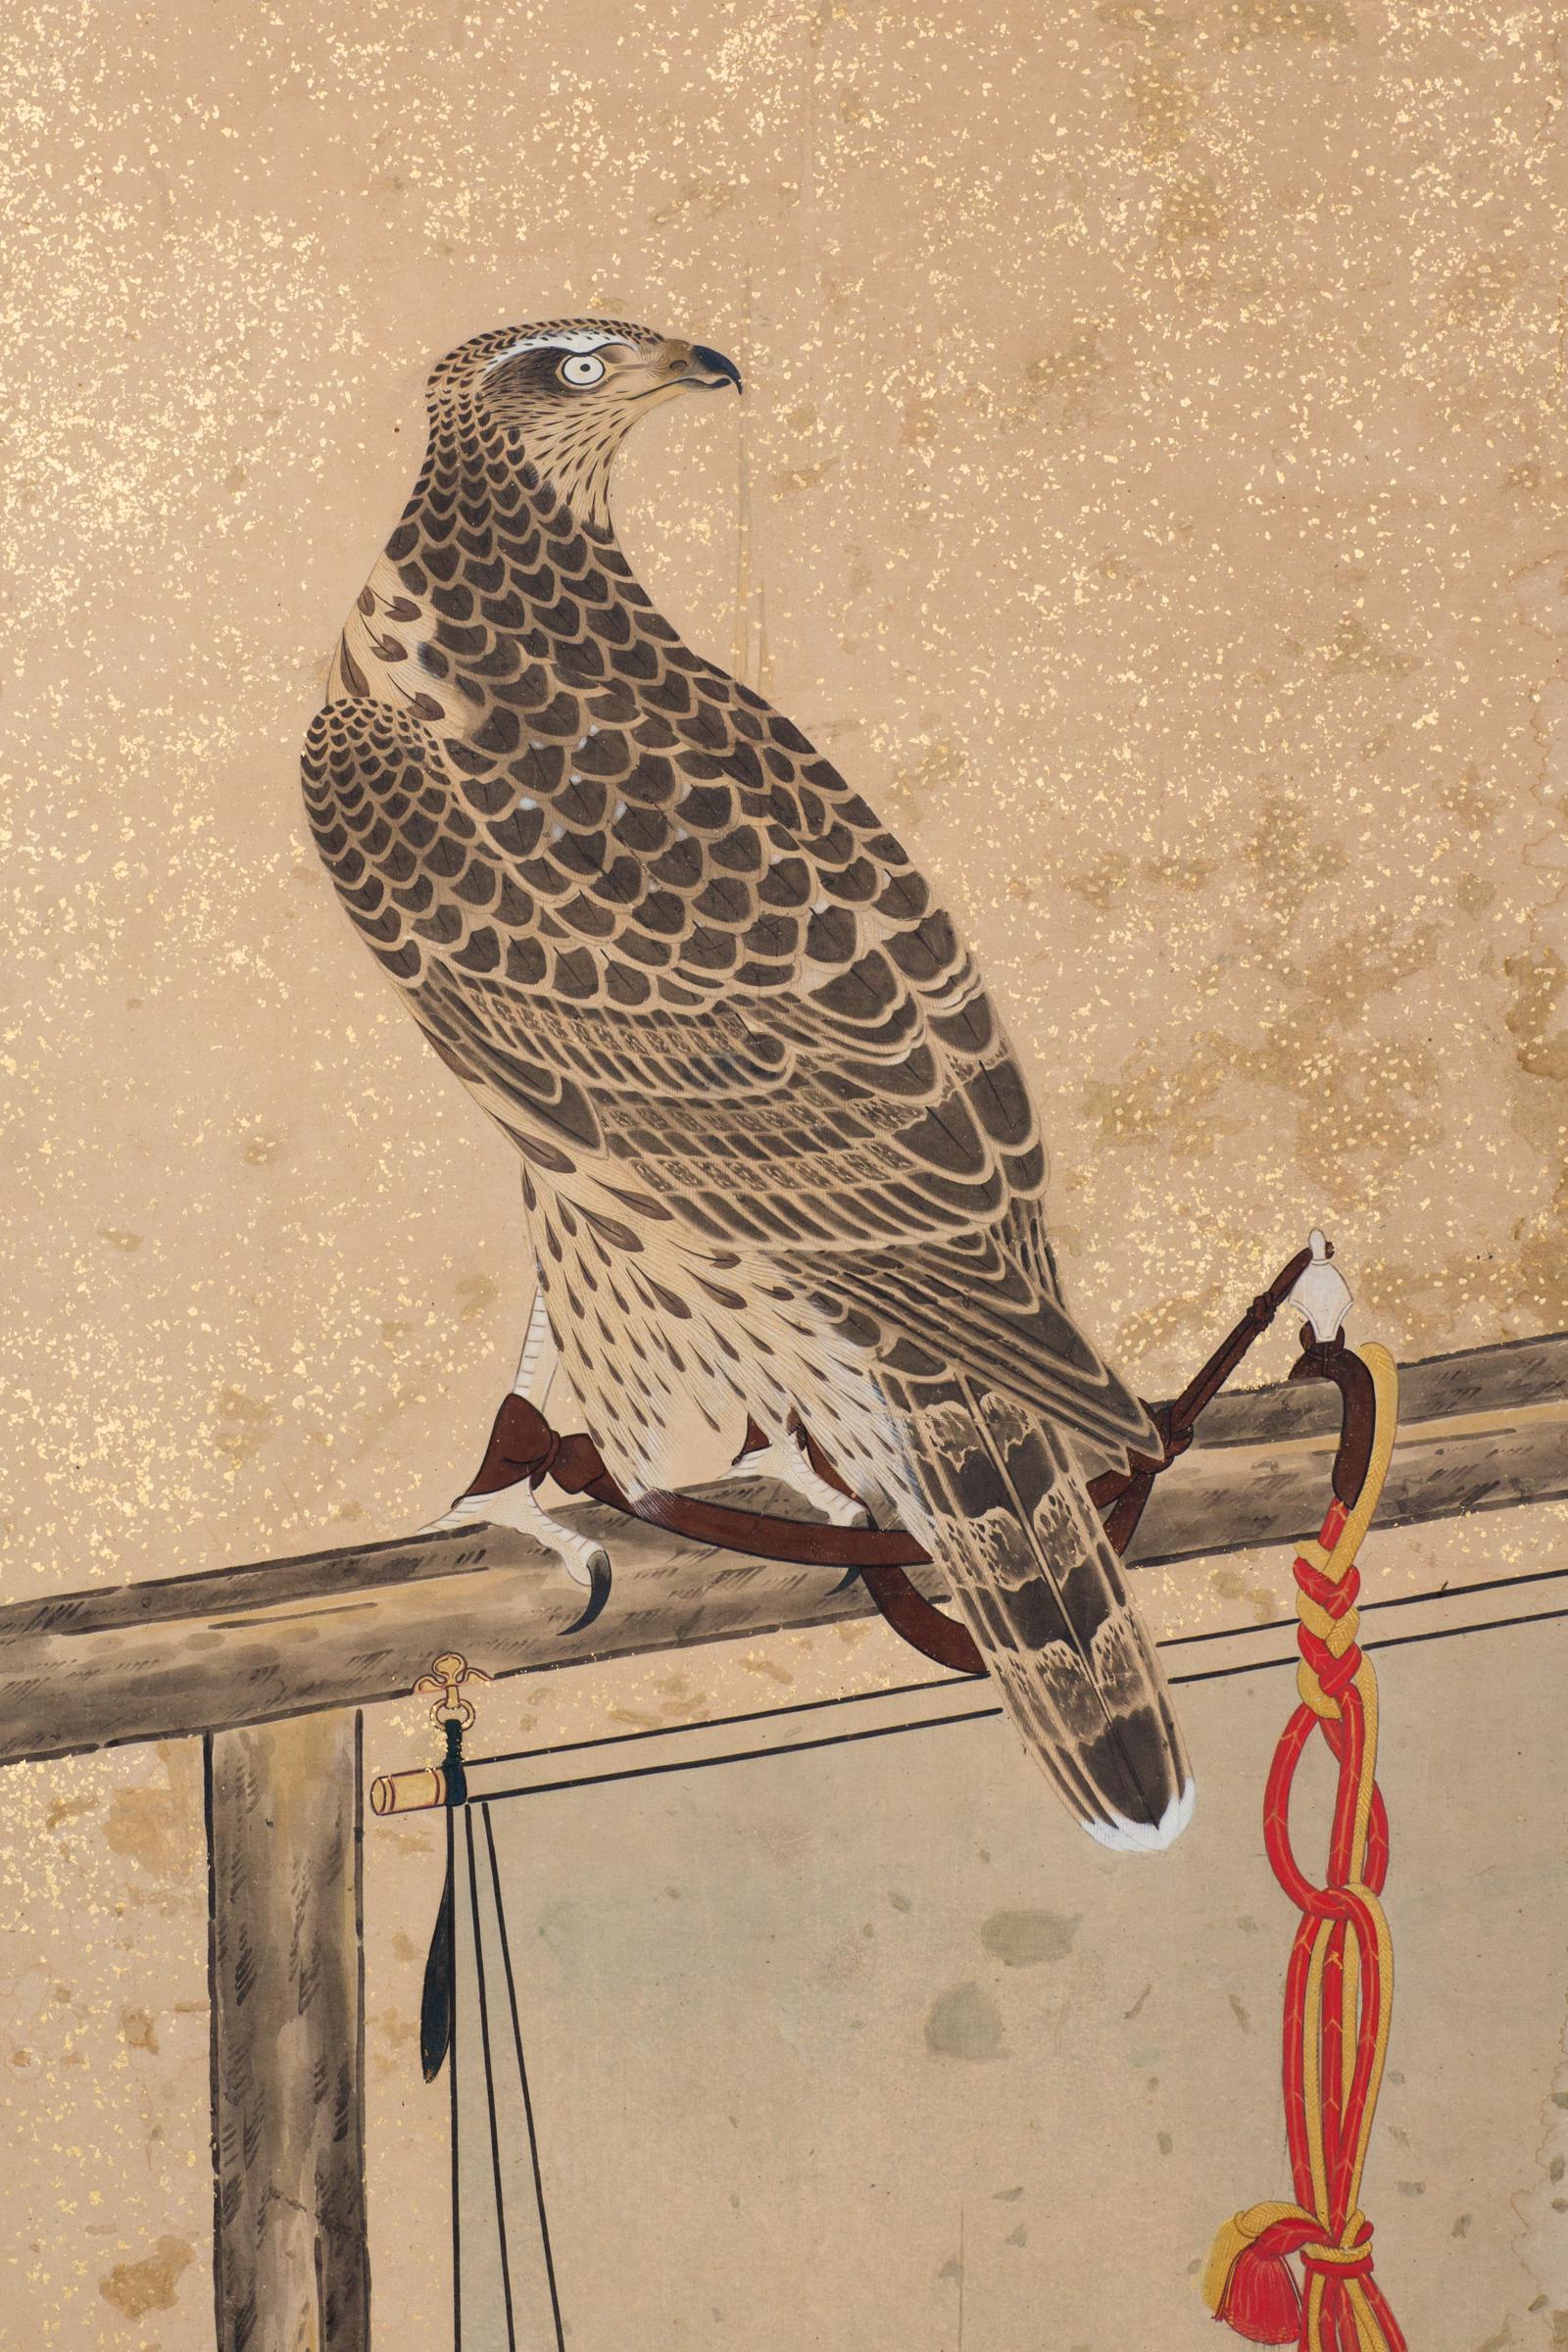 Late Edo period (1614-1868) painting of two falcons with silk knotted tethers resting on perches. Ink on paper mounted on gold with gold flecks, a hand painted checkerboard pattern, and a silk brocade border. Painting is circa 1800, mounted on board